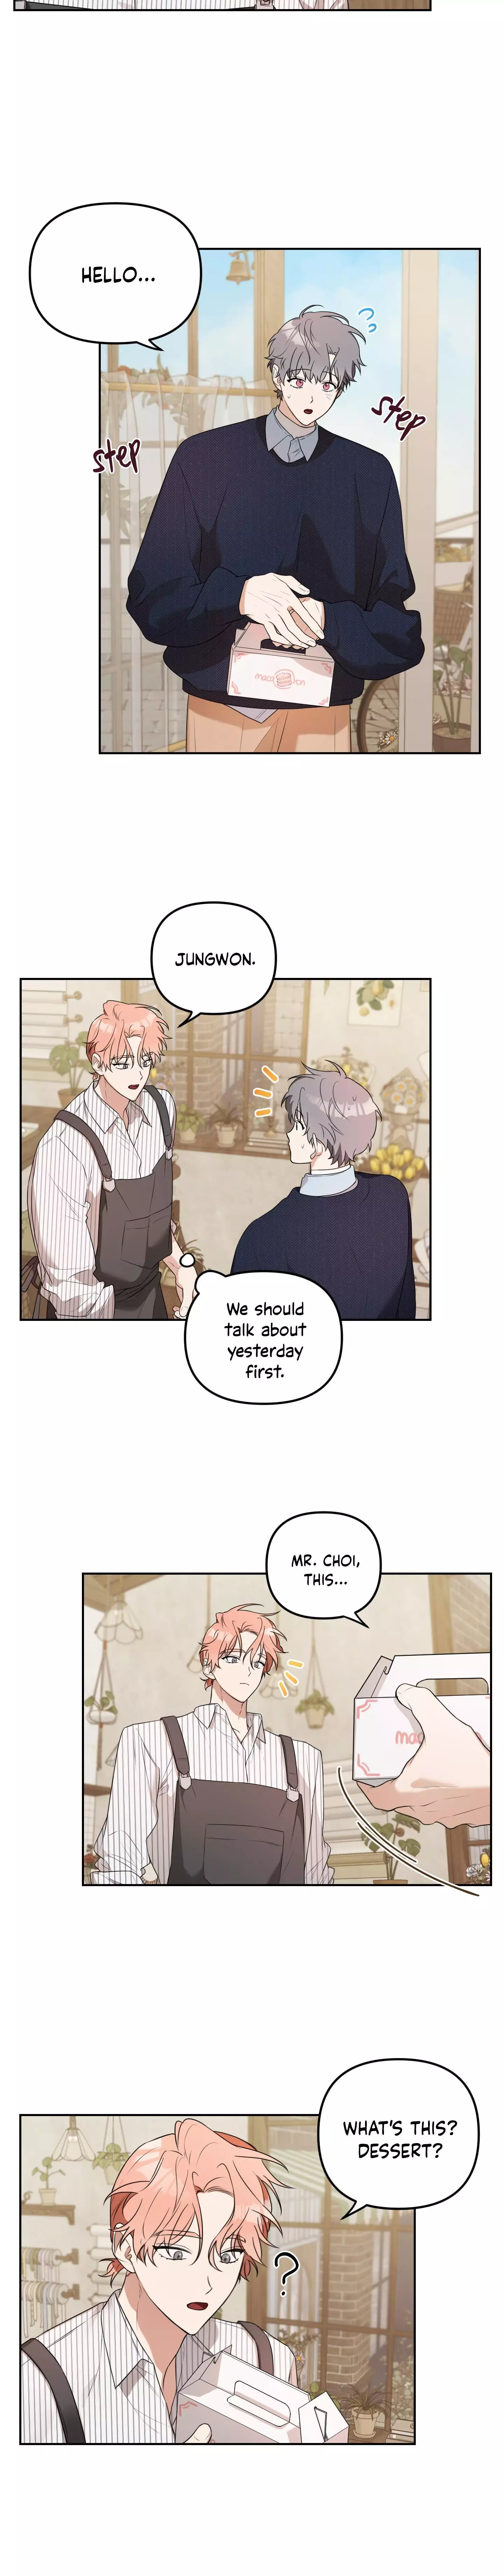 Jungwon’S Flowers - 6 page 9-6864e3ff